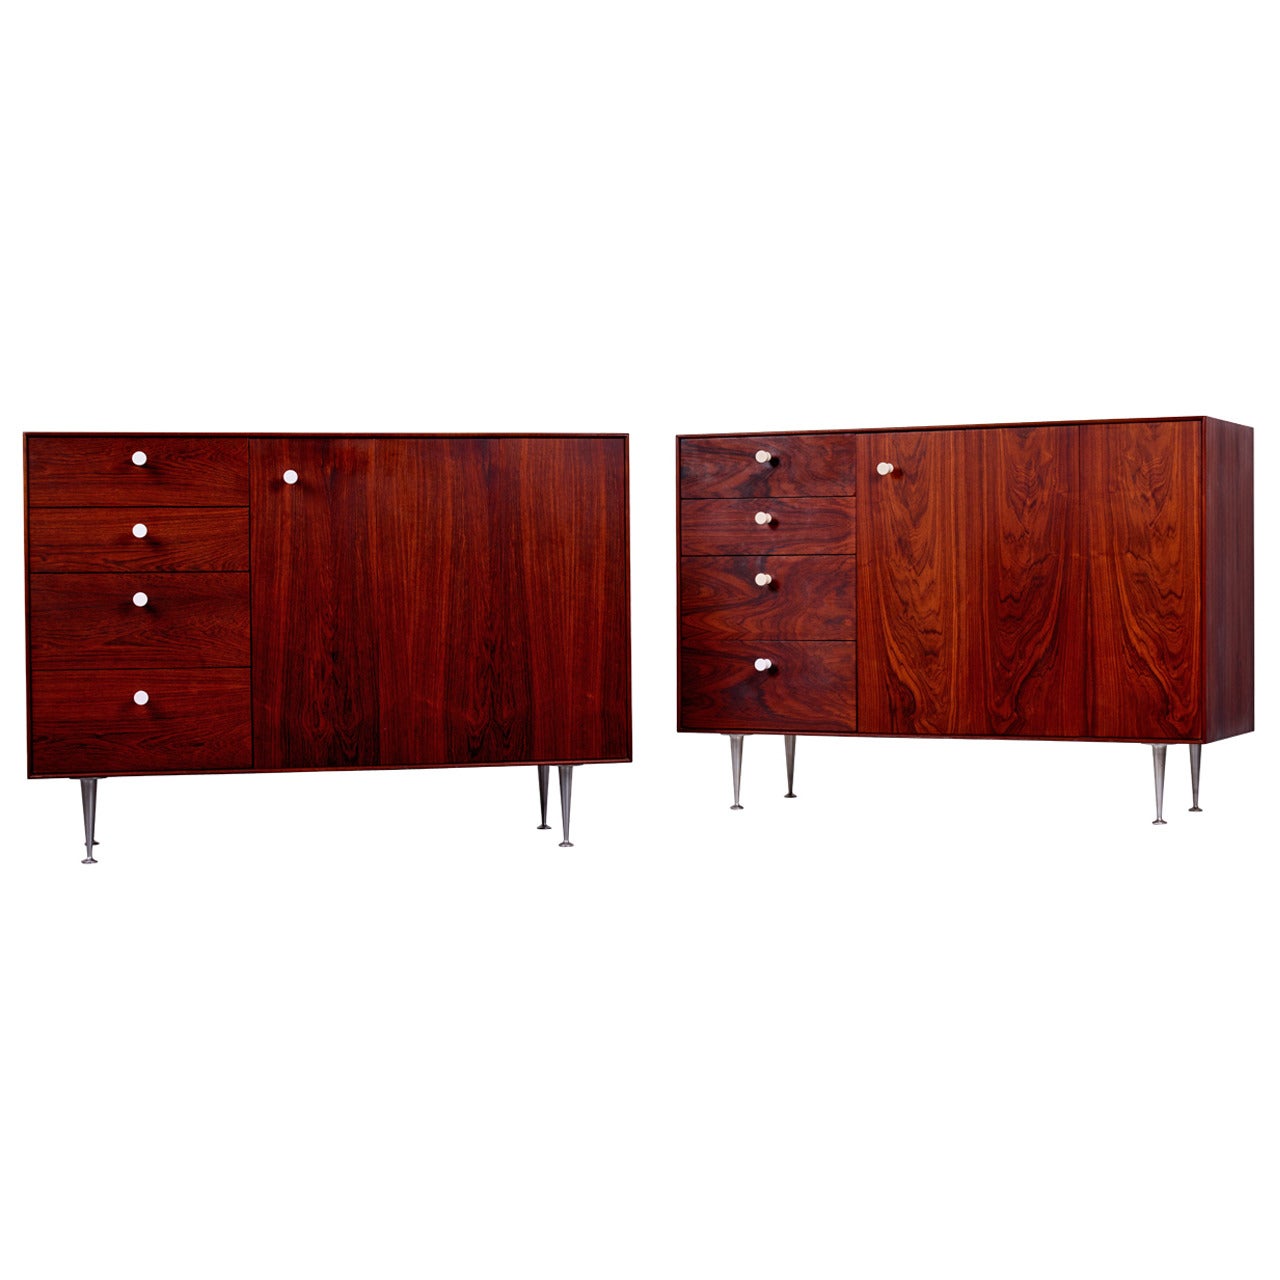 George Nelson & Associates Thin Edge Cabinets in Rosewood, 1952